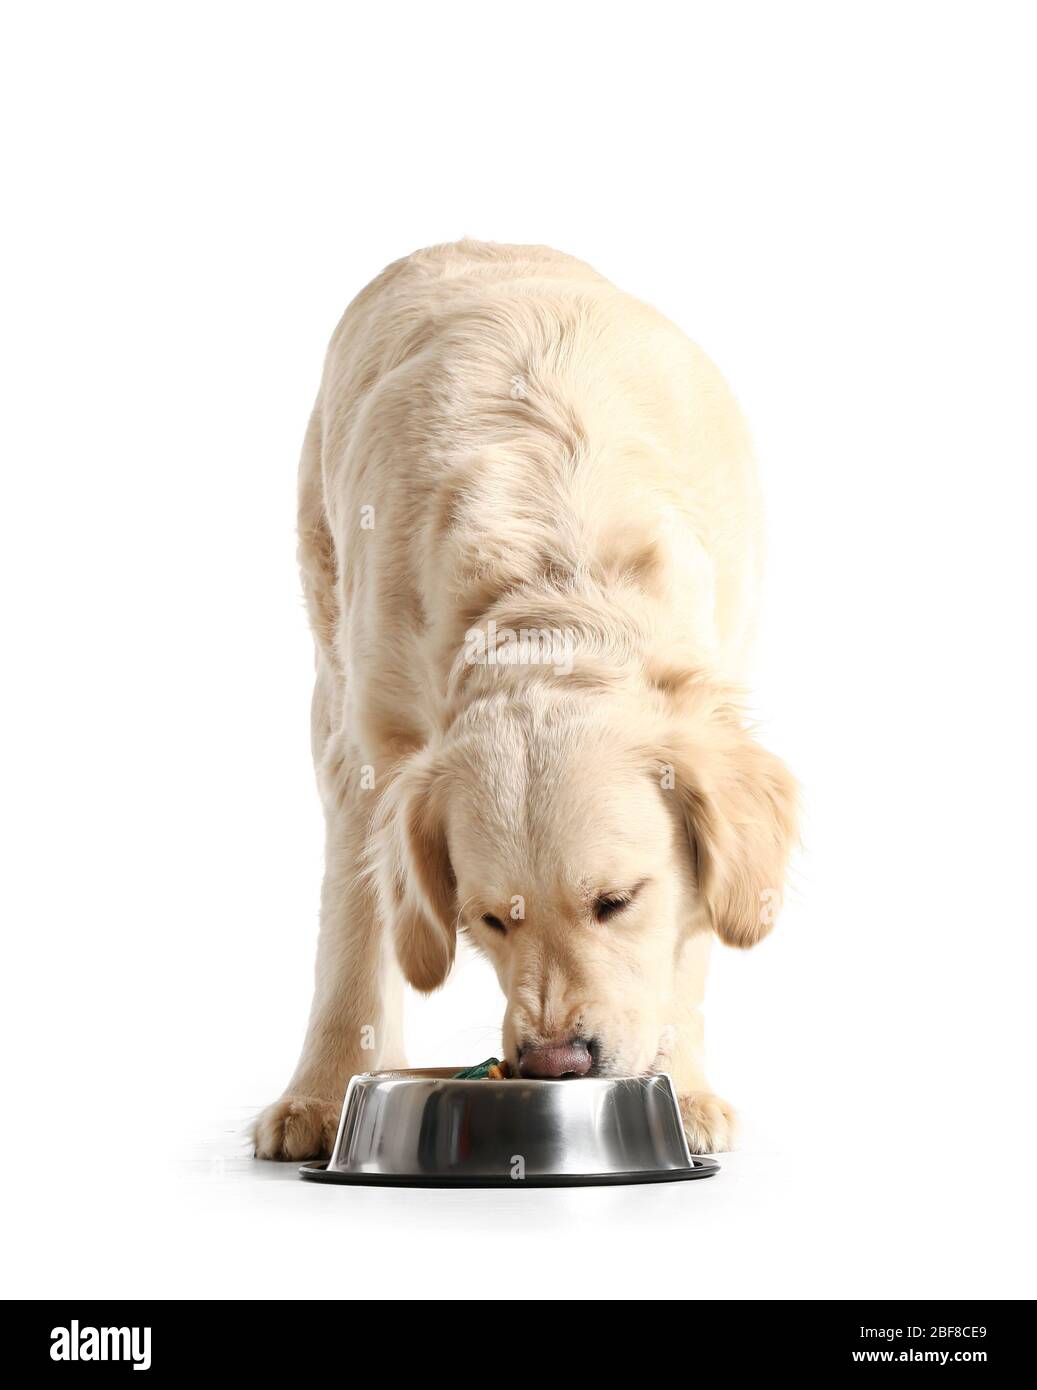 Cute dog eating food from bowl on white background Stock Photo - Alamy